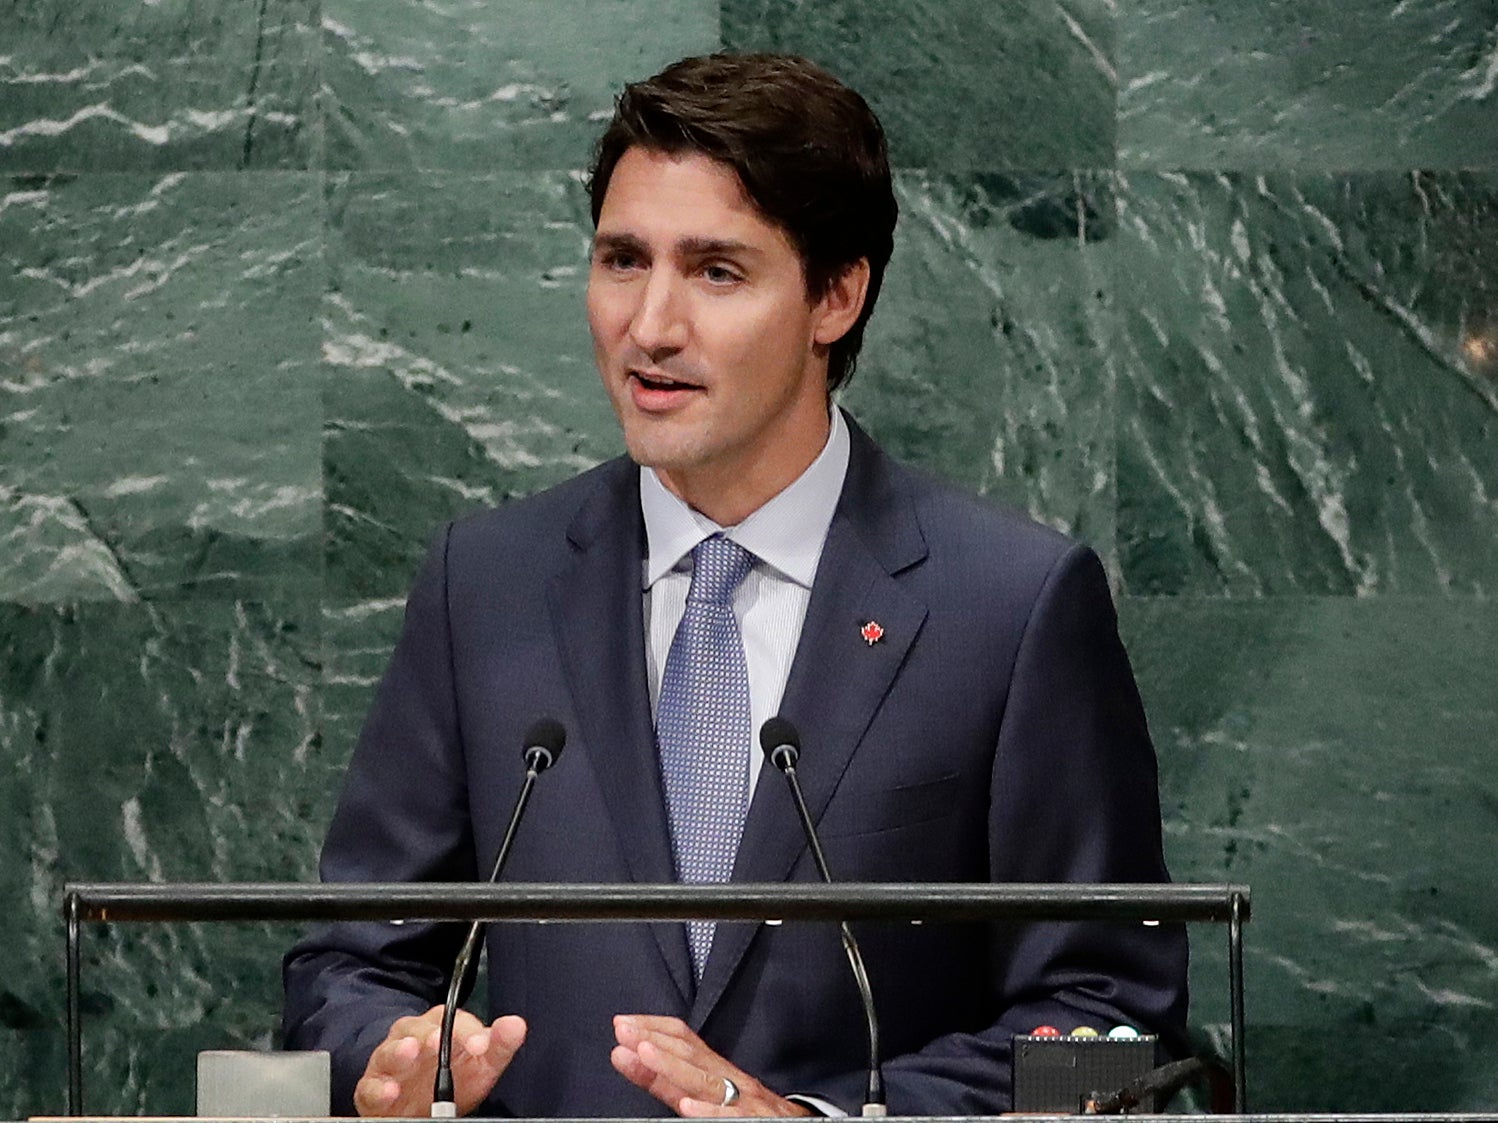 Justin Trudeau called for an initial levy of $10 (£6) per tonne of emissions in 2016